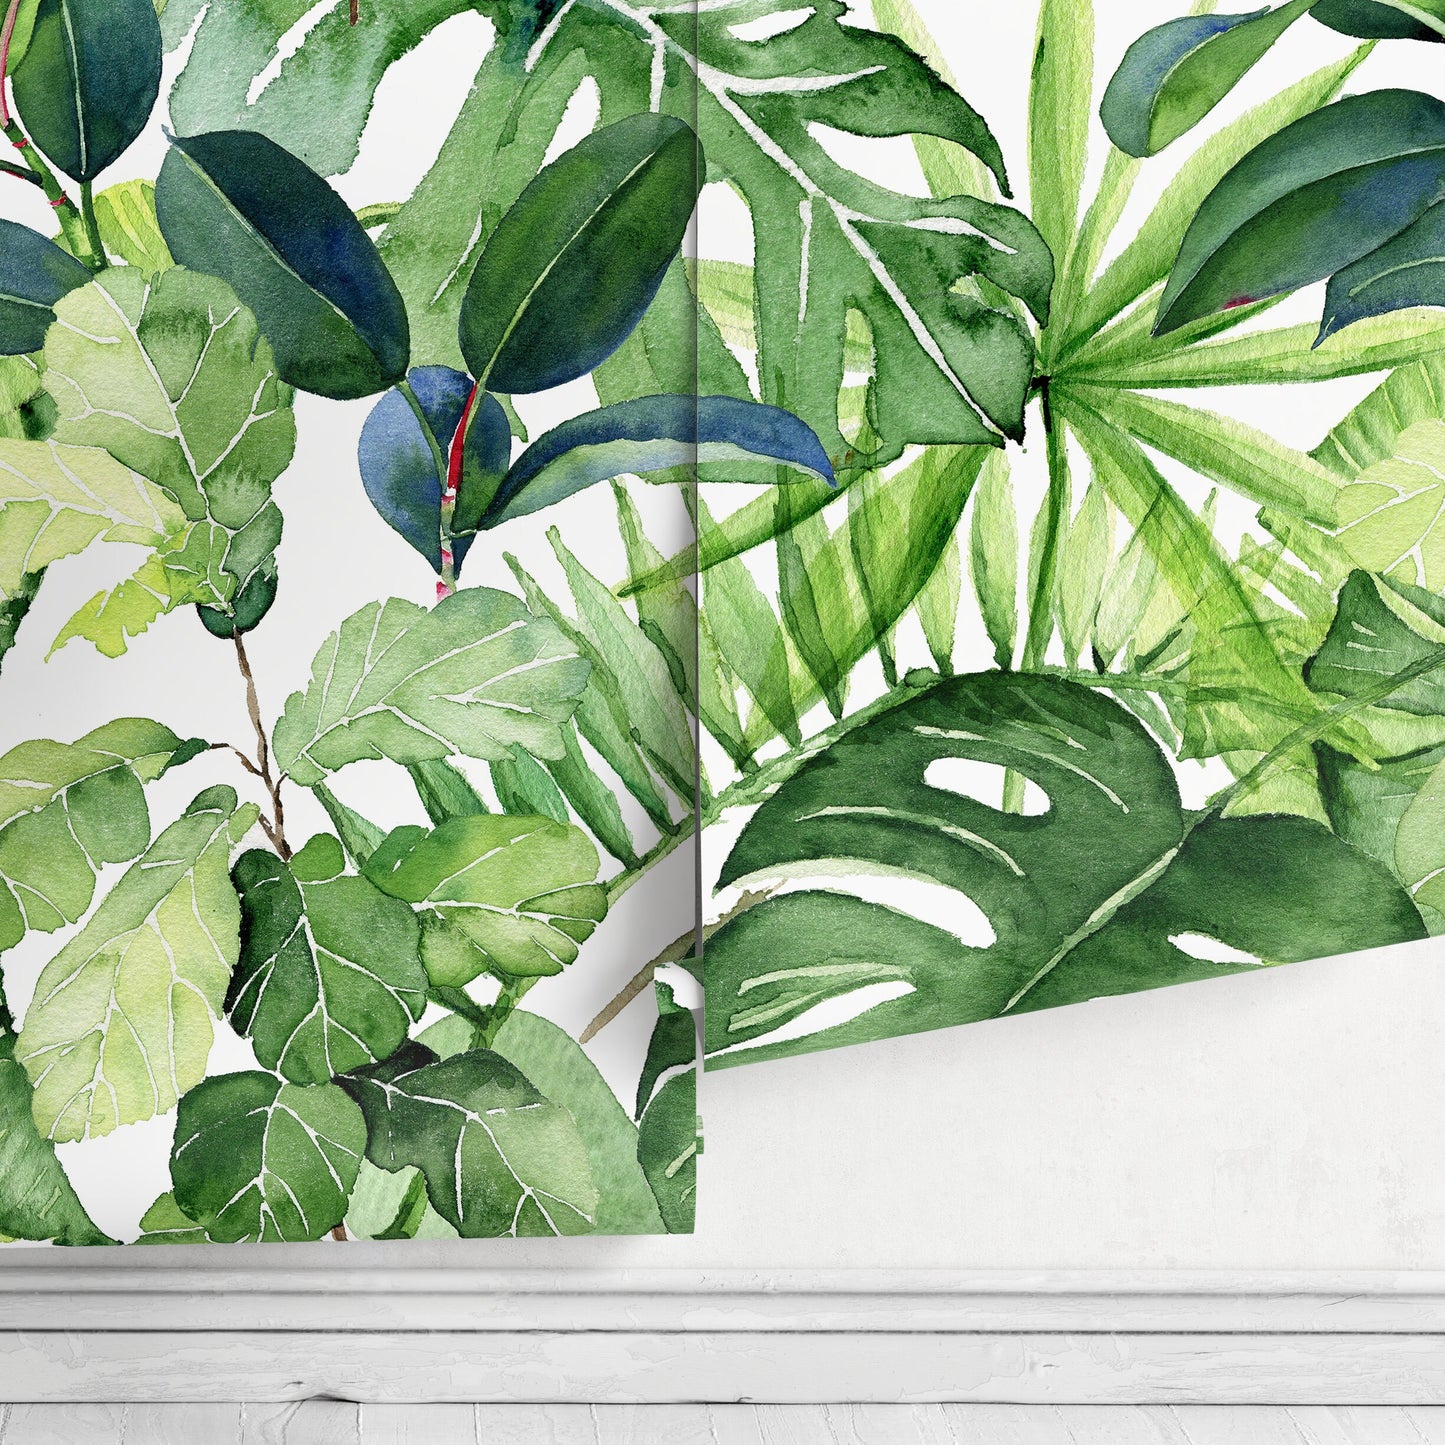 Removable Wallpaper Removable Wallpaper Tropical Leaves Removable Peel and Stick Wallpaper Self Adhesive - A744